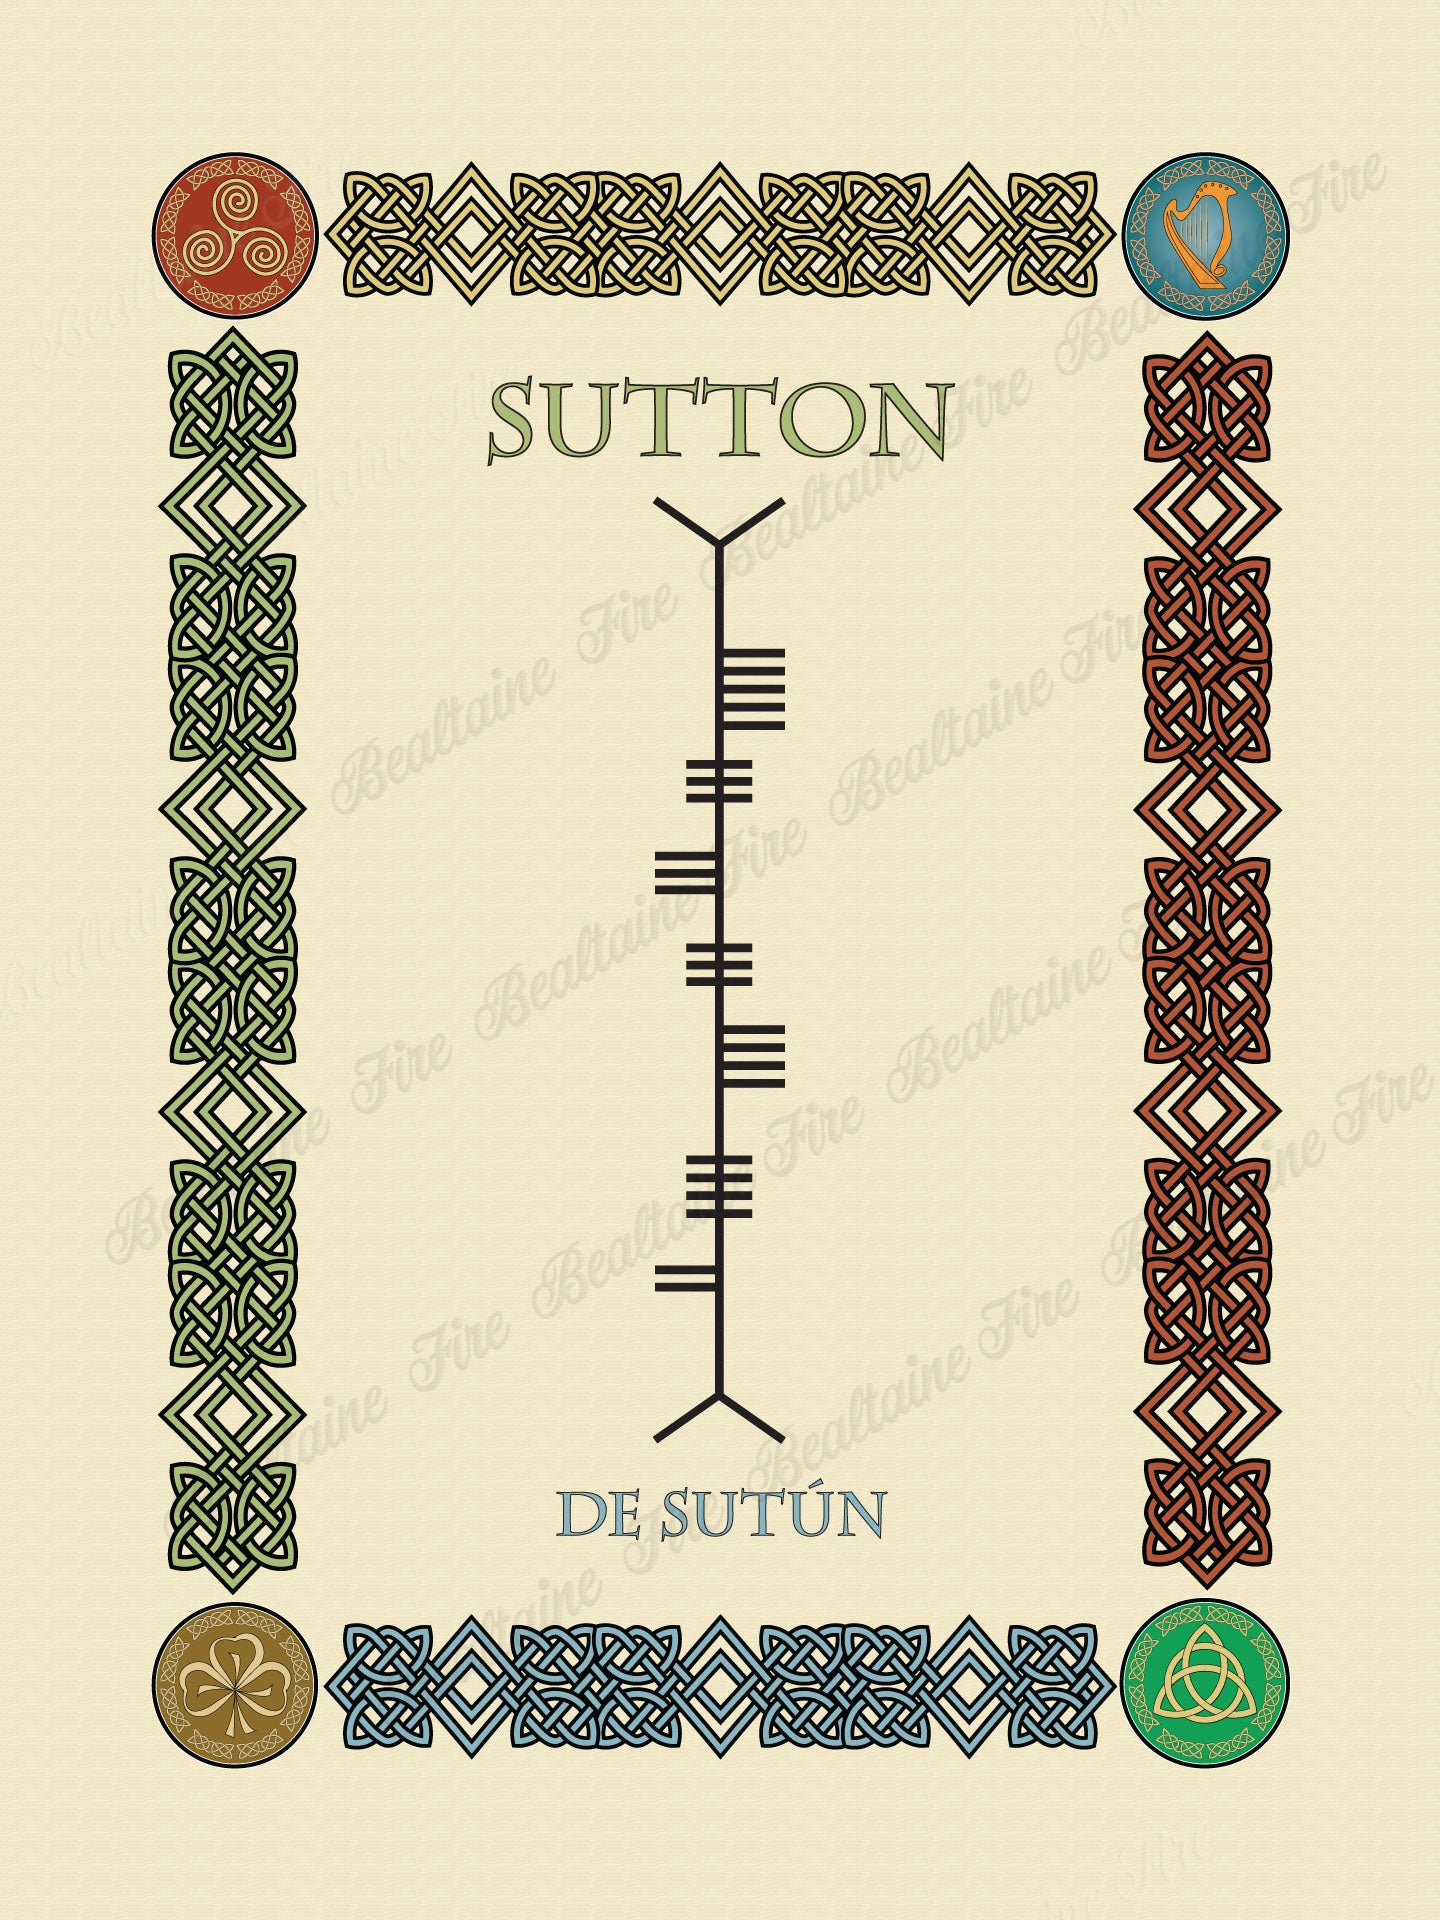 Sutton in Old Irish and Ogham - PDF Download